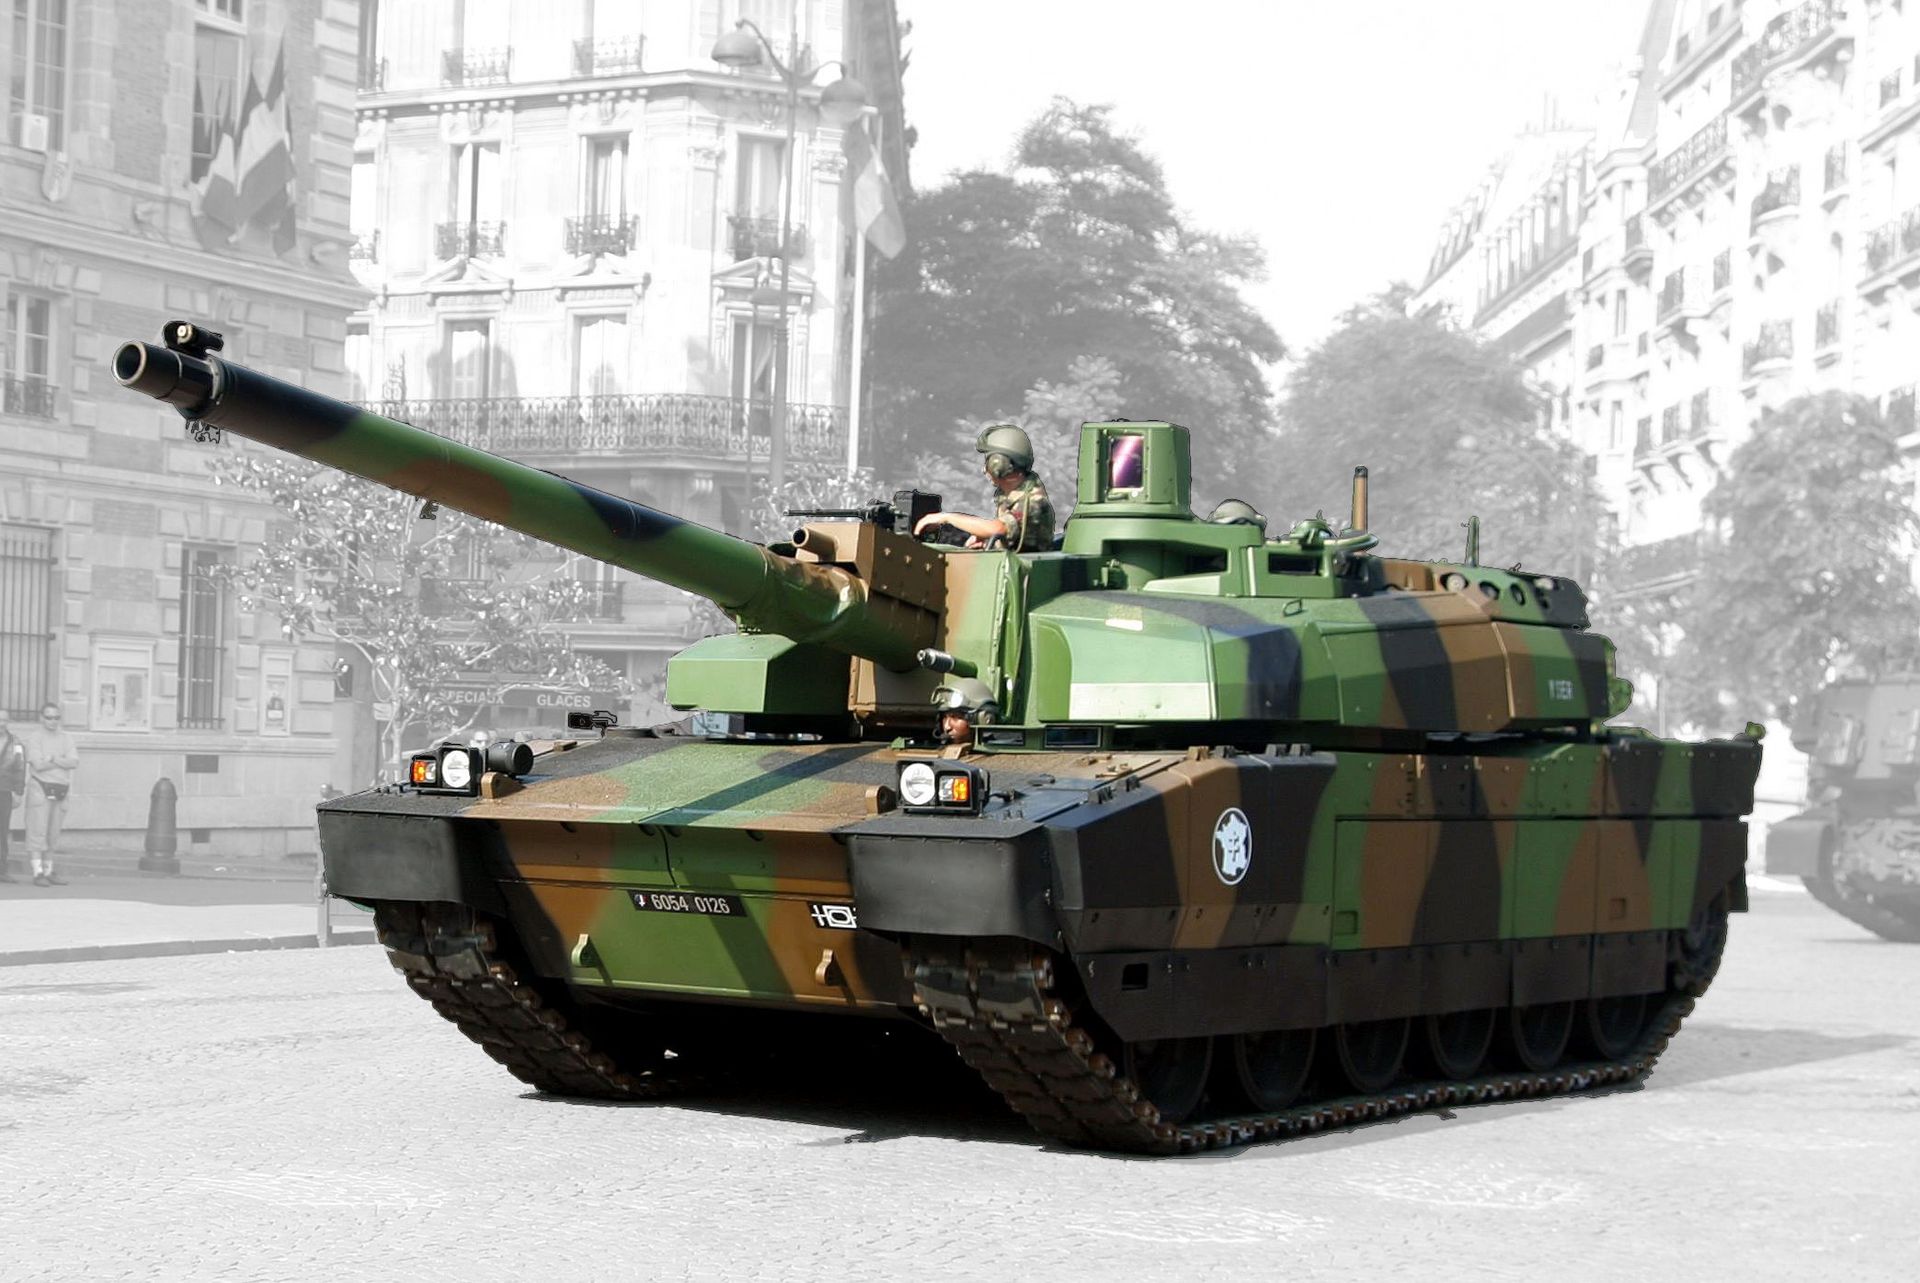 France's Leclerc Tank The Best in the World? The National Interest Blog